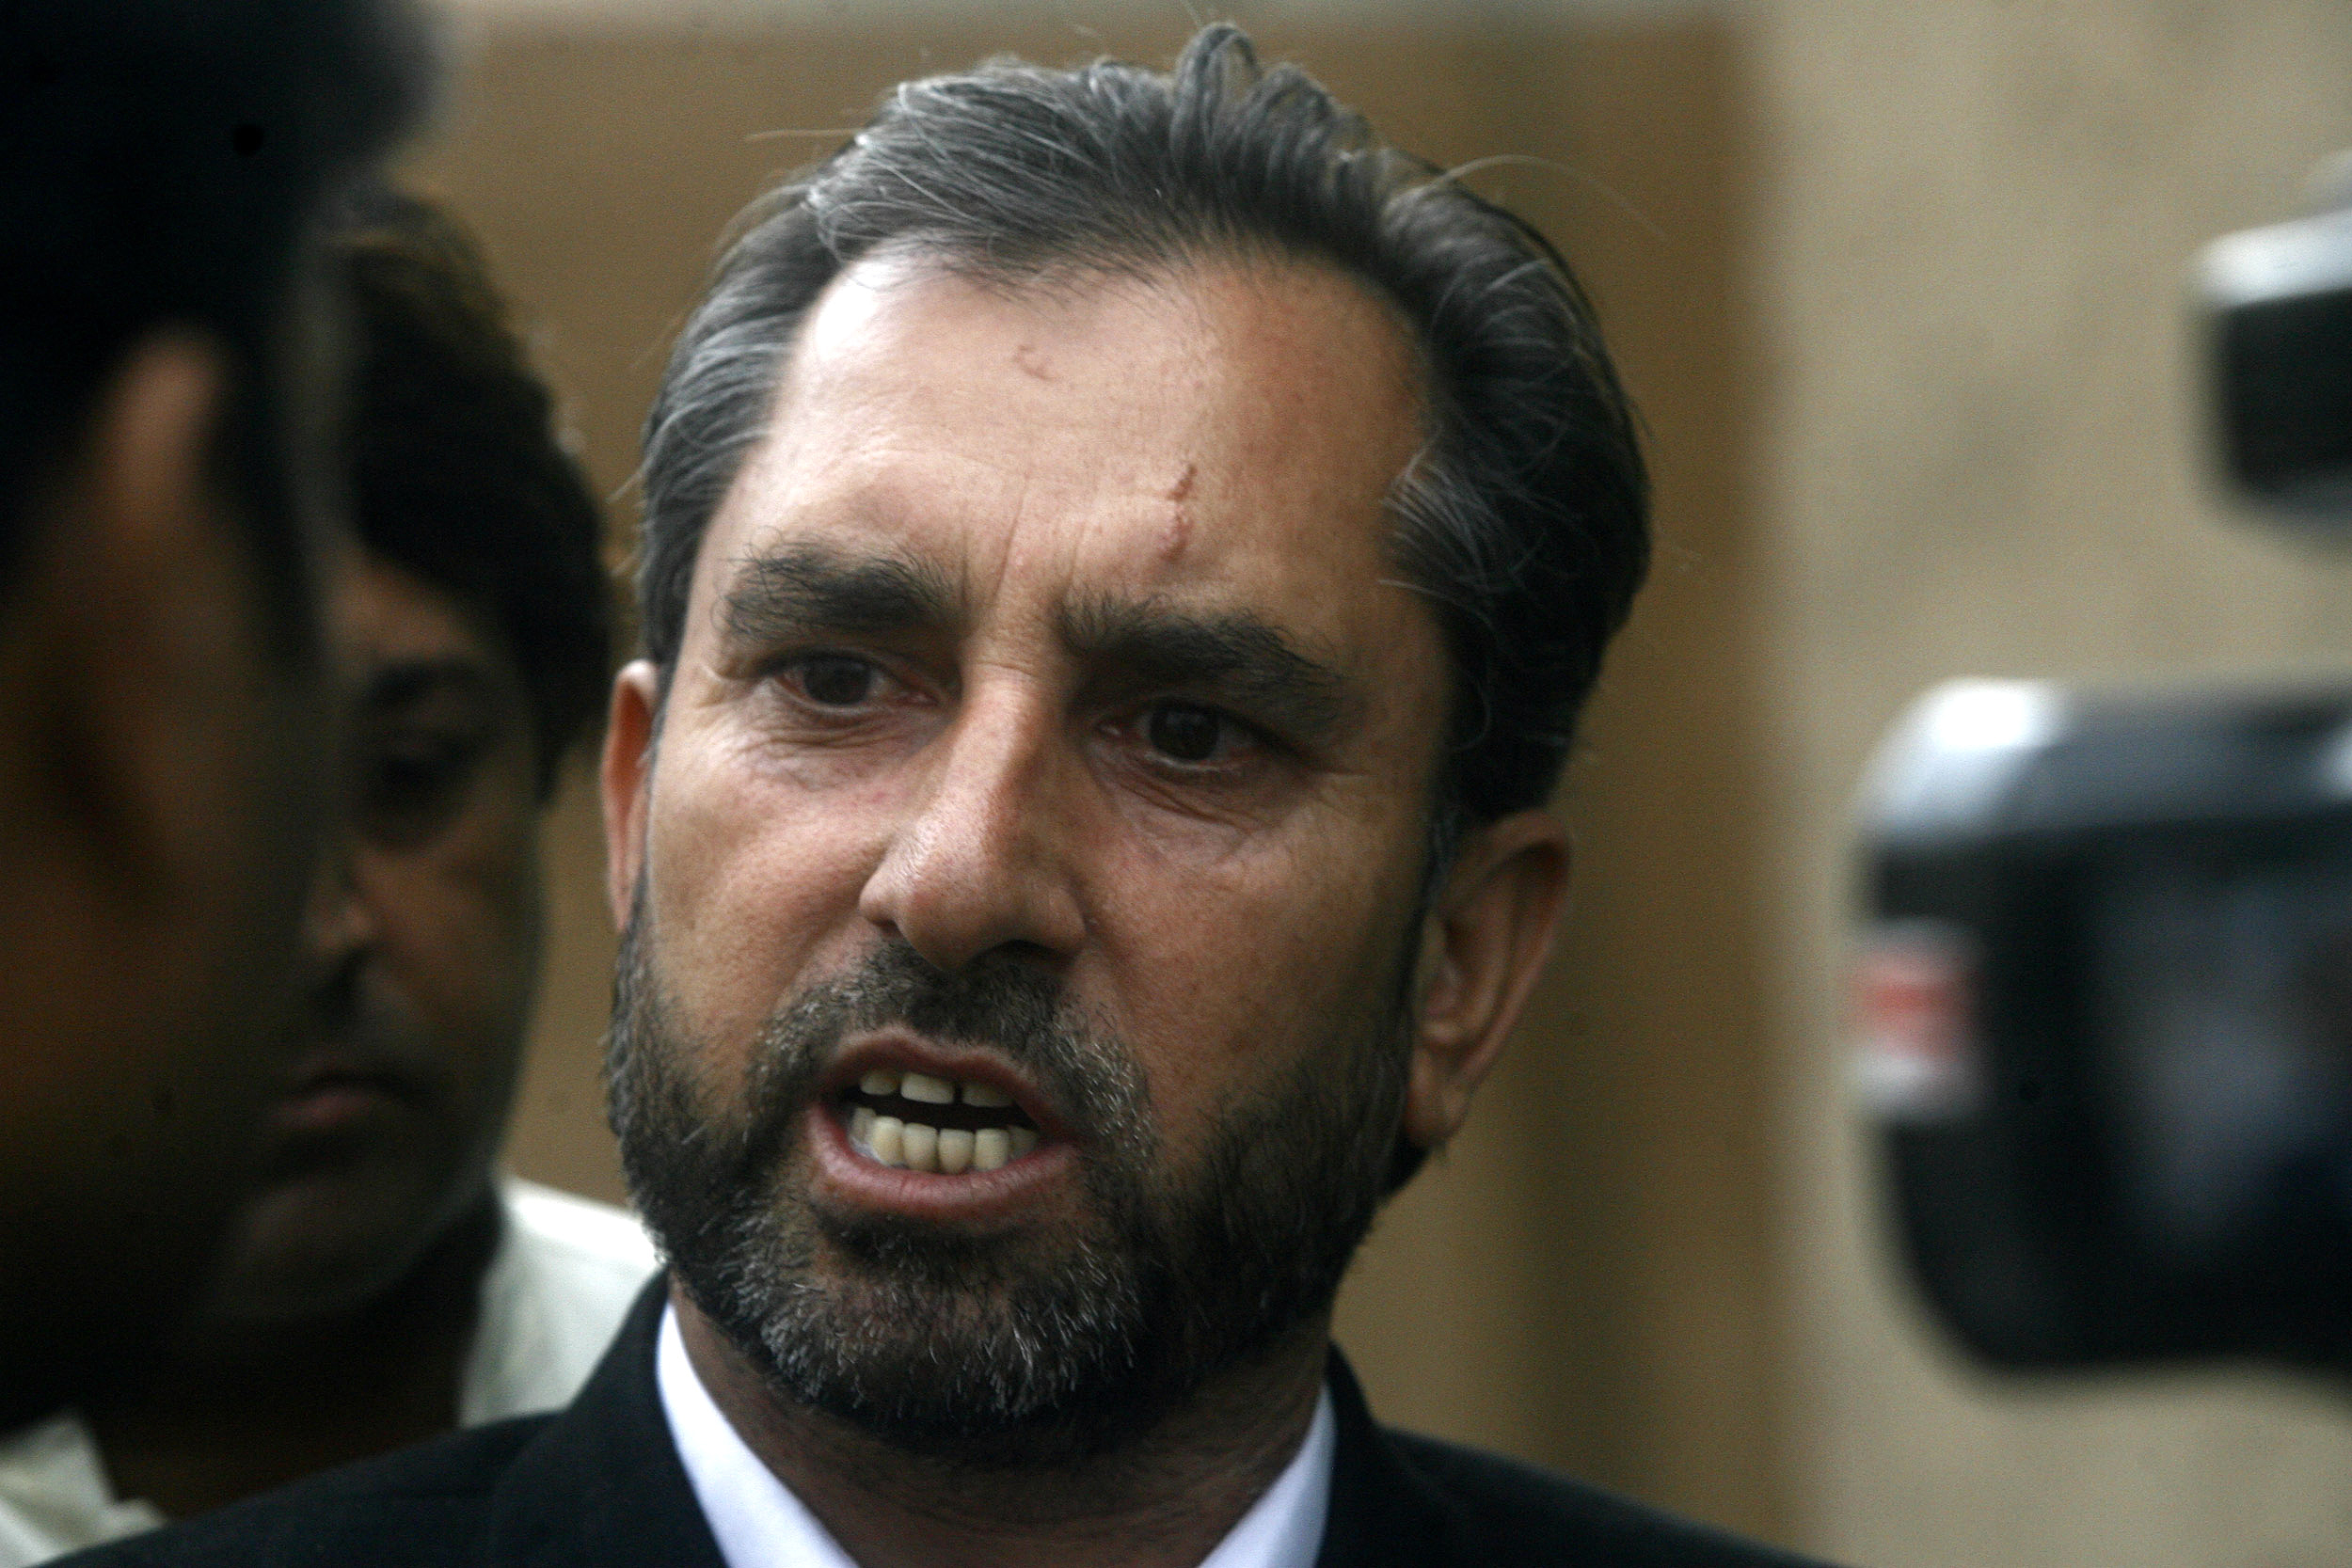 Samiullah Afridi, lawyer for Dr. Shakil Afridi who ran a fake vaccination campaign to help U.S. officials find al-Qaeda leader Osama bin laden, speaks to the media after appearing before the court in Peshawar, Pakistan, on Oct. 30, 2013 (Khuram Parvez—Reuters)